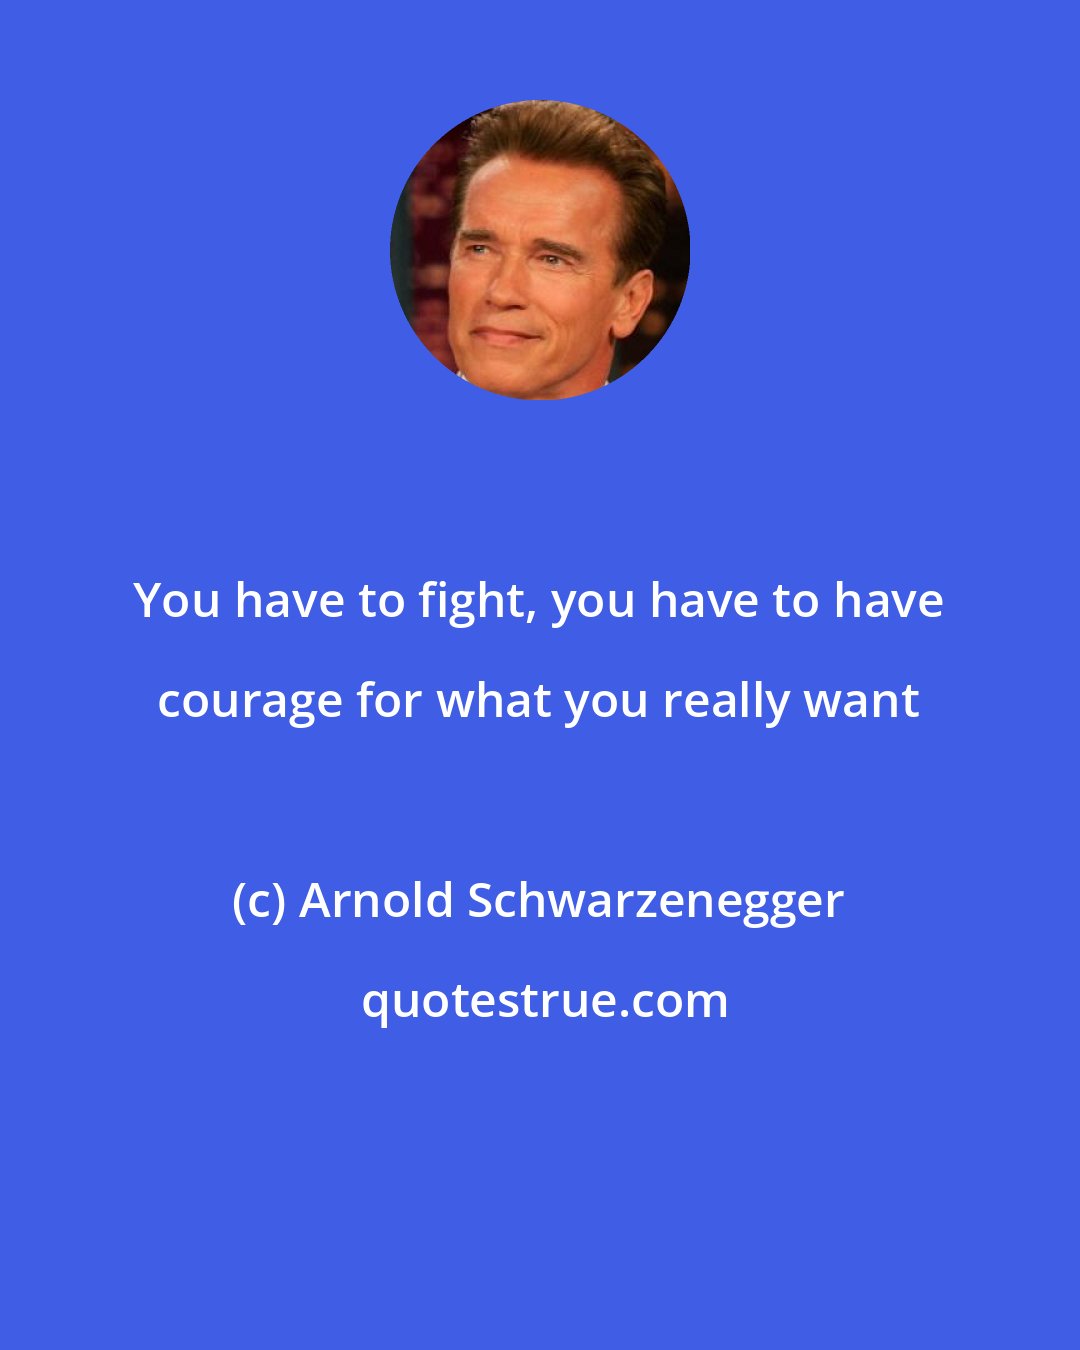 Arnold Schwarzenegger: You have to fight, you have to have courage for what you really want